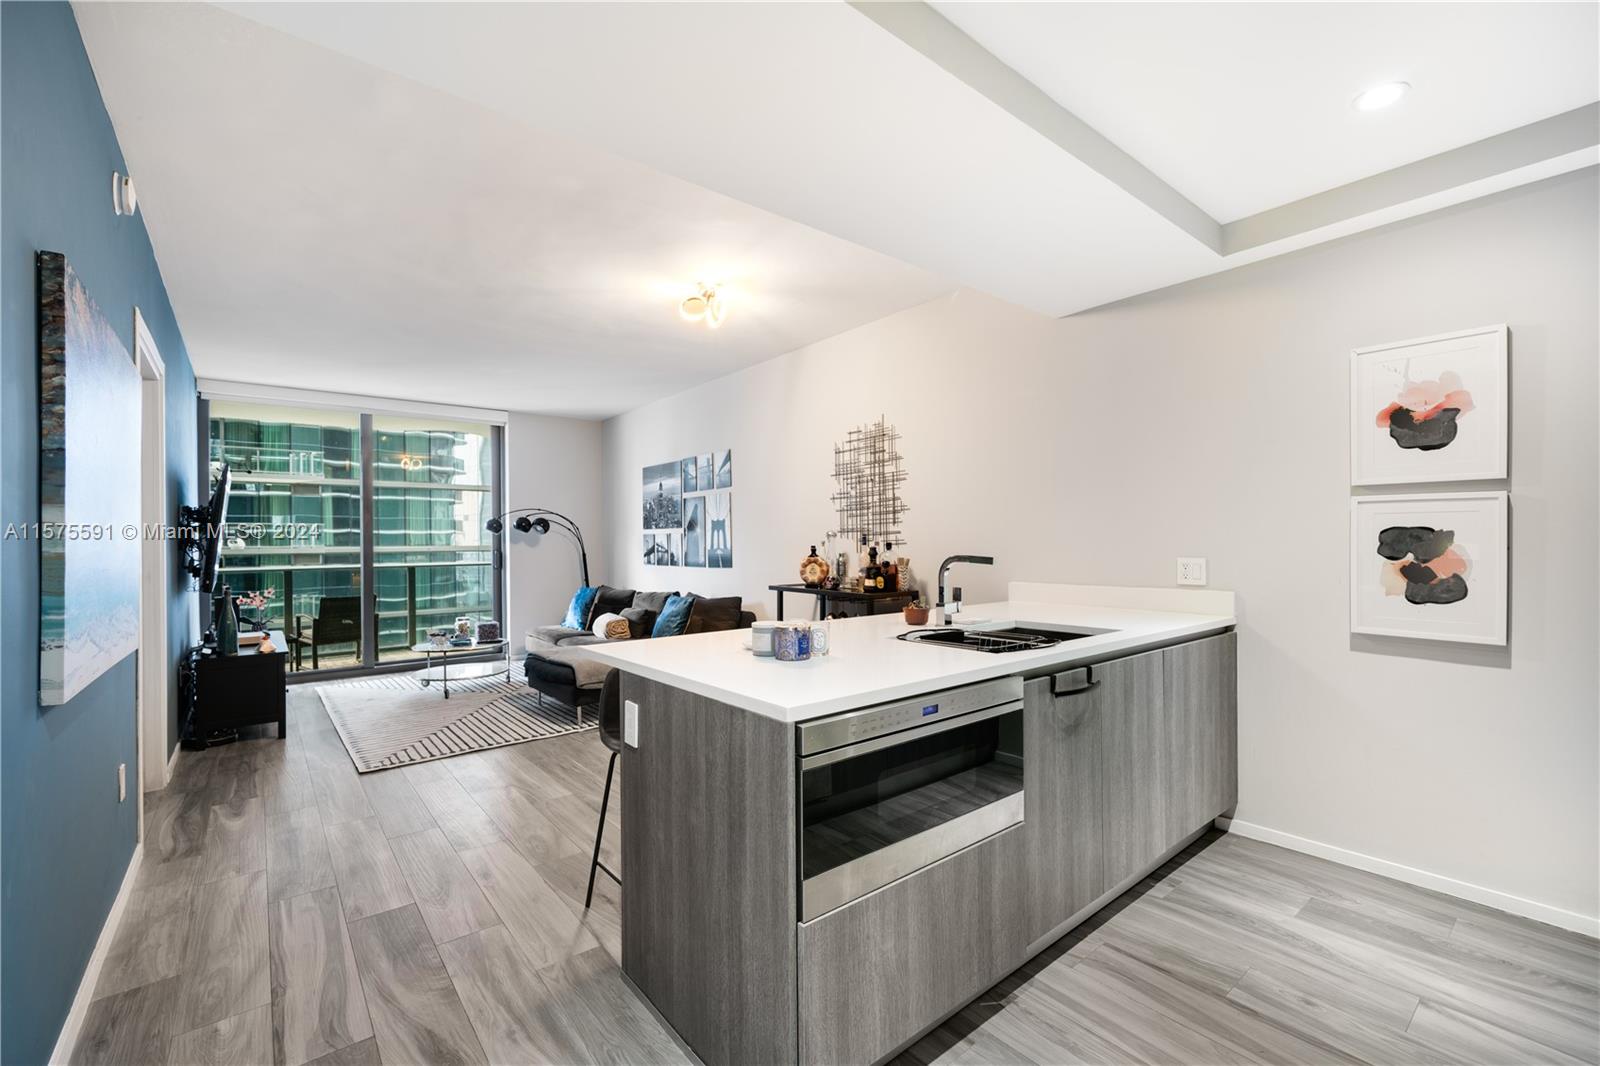 Located in the heart of Brickell, this contemporary 1-bedroom, 2-full bathroom + den condo at the SLS Lux is a must-see! The residence is located off of a private elevator with biometric technology and features electric blinds throughout, a fully finished walk-in master bedroom closet, Smart Home Technology with a control pad, Sub-Zero and Wolf appliances, Italkraft cabinets, an in-unit washer/dryer, floor-to-ceiling windows, a spacious terrace and a rain shower and spa tub in the master bathroom. The luxury building boasts premium amenities including a full-service spa, tennis court, fitness center, 57th floor pool and sun deck, 44th floor sky lounge, 9th floor outdoor pool with TV’s and accompanying cabanas, al fresco dining, kids play room, basketball hoop and concierge services.